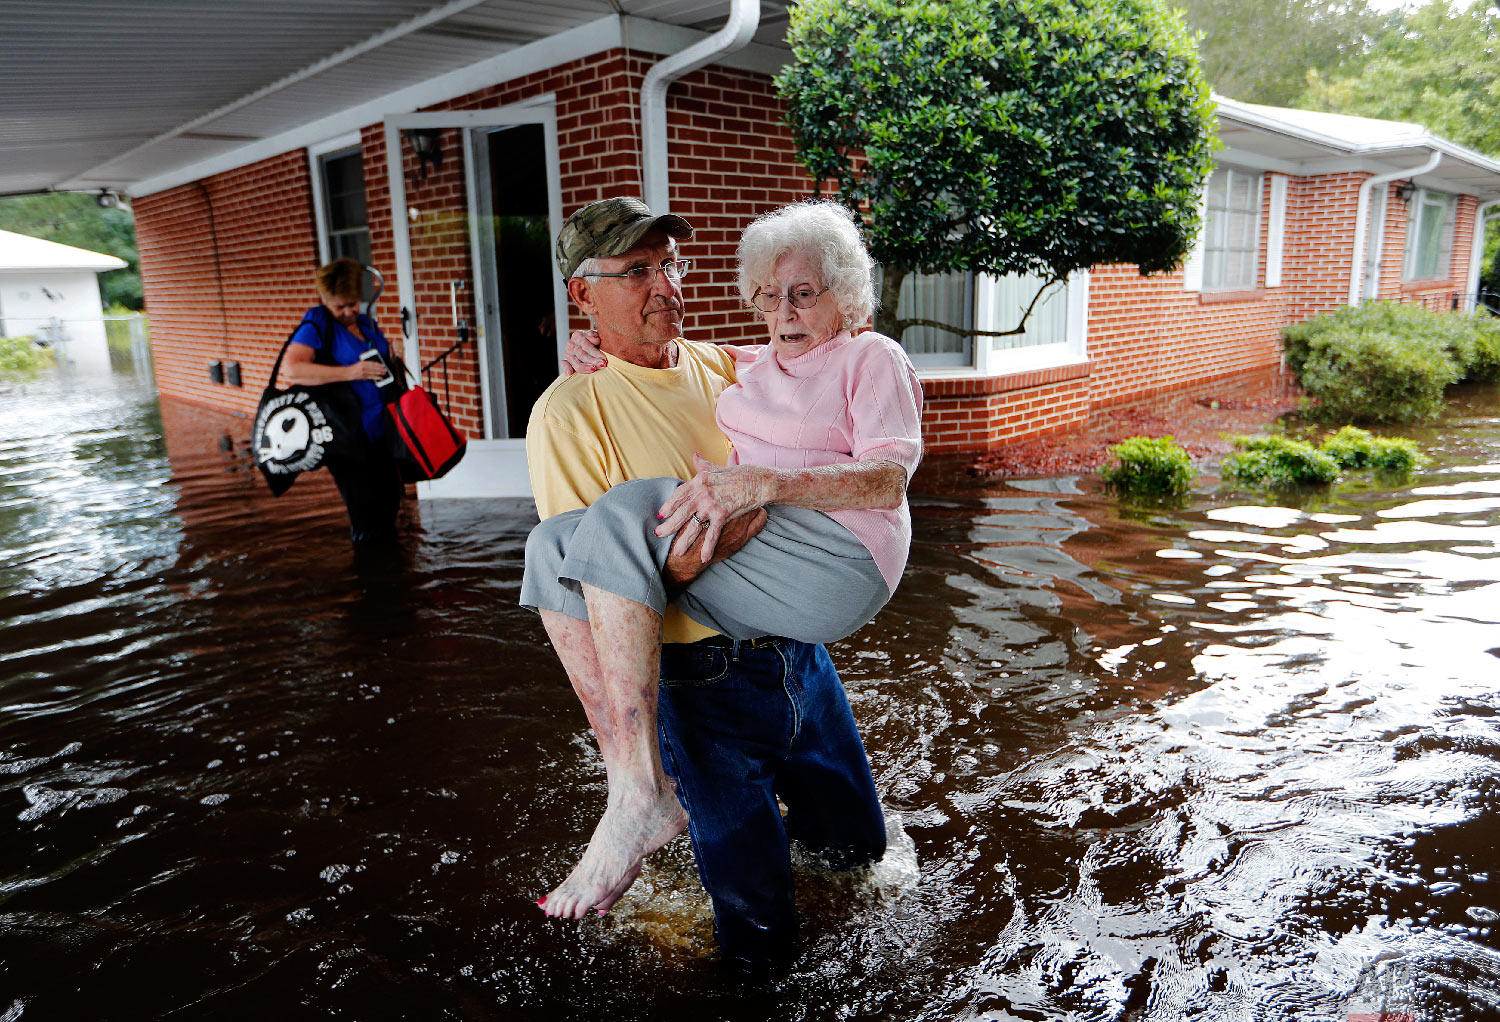  Bob Richling carries Iris Darden, 84, out of her flooded home as her daughter-in-law, Pam Darden, gathers her belongings in the aftermath of Hurricane Florence in Spring Lake, N.C. on Sept. 17, 2018. (AP Photo/David Goldman) 